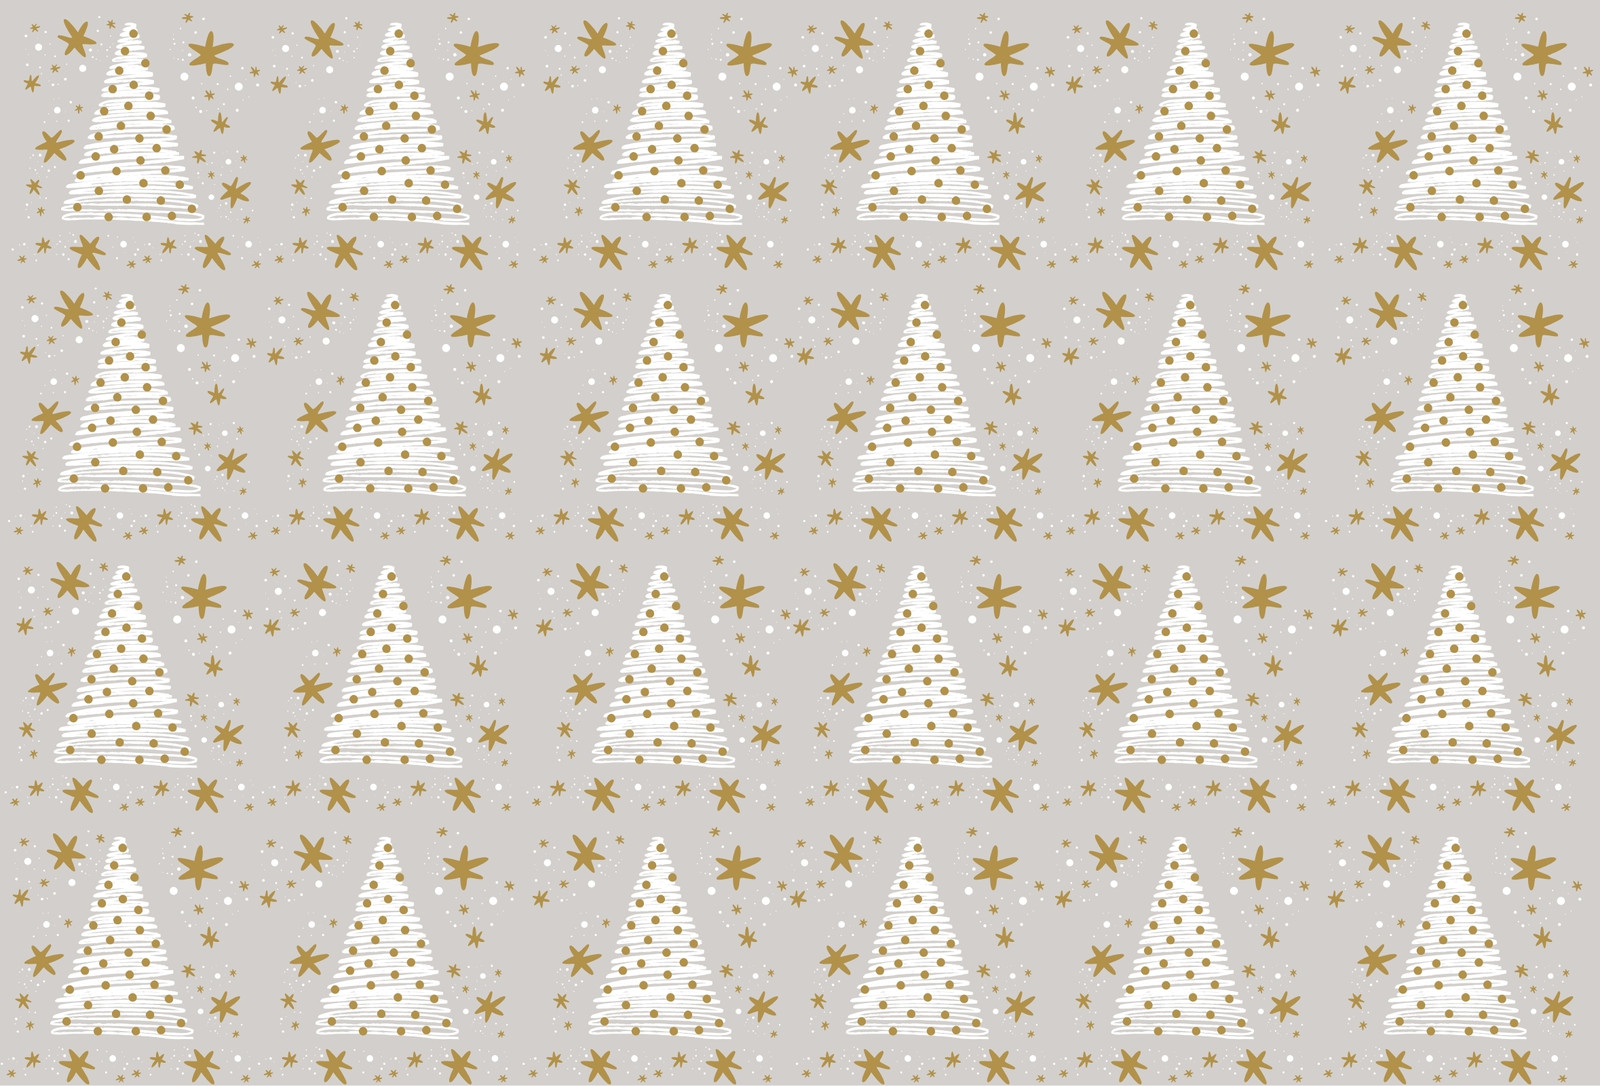 Trippy Beige Pattern Tissue/wrapping Paper Design, Editable in Canva 